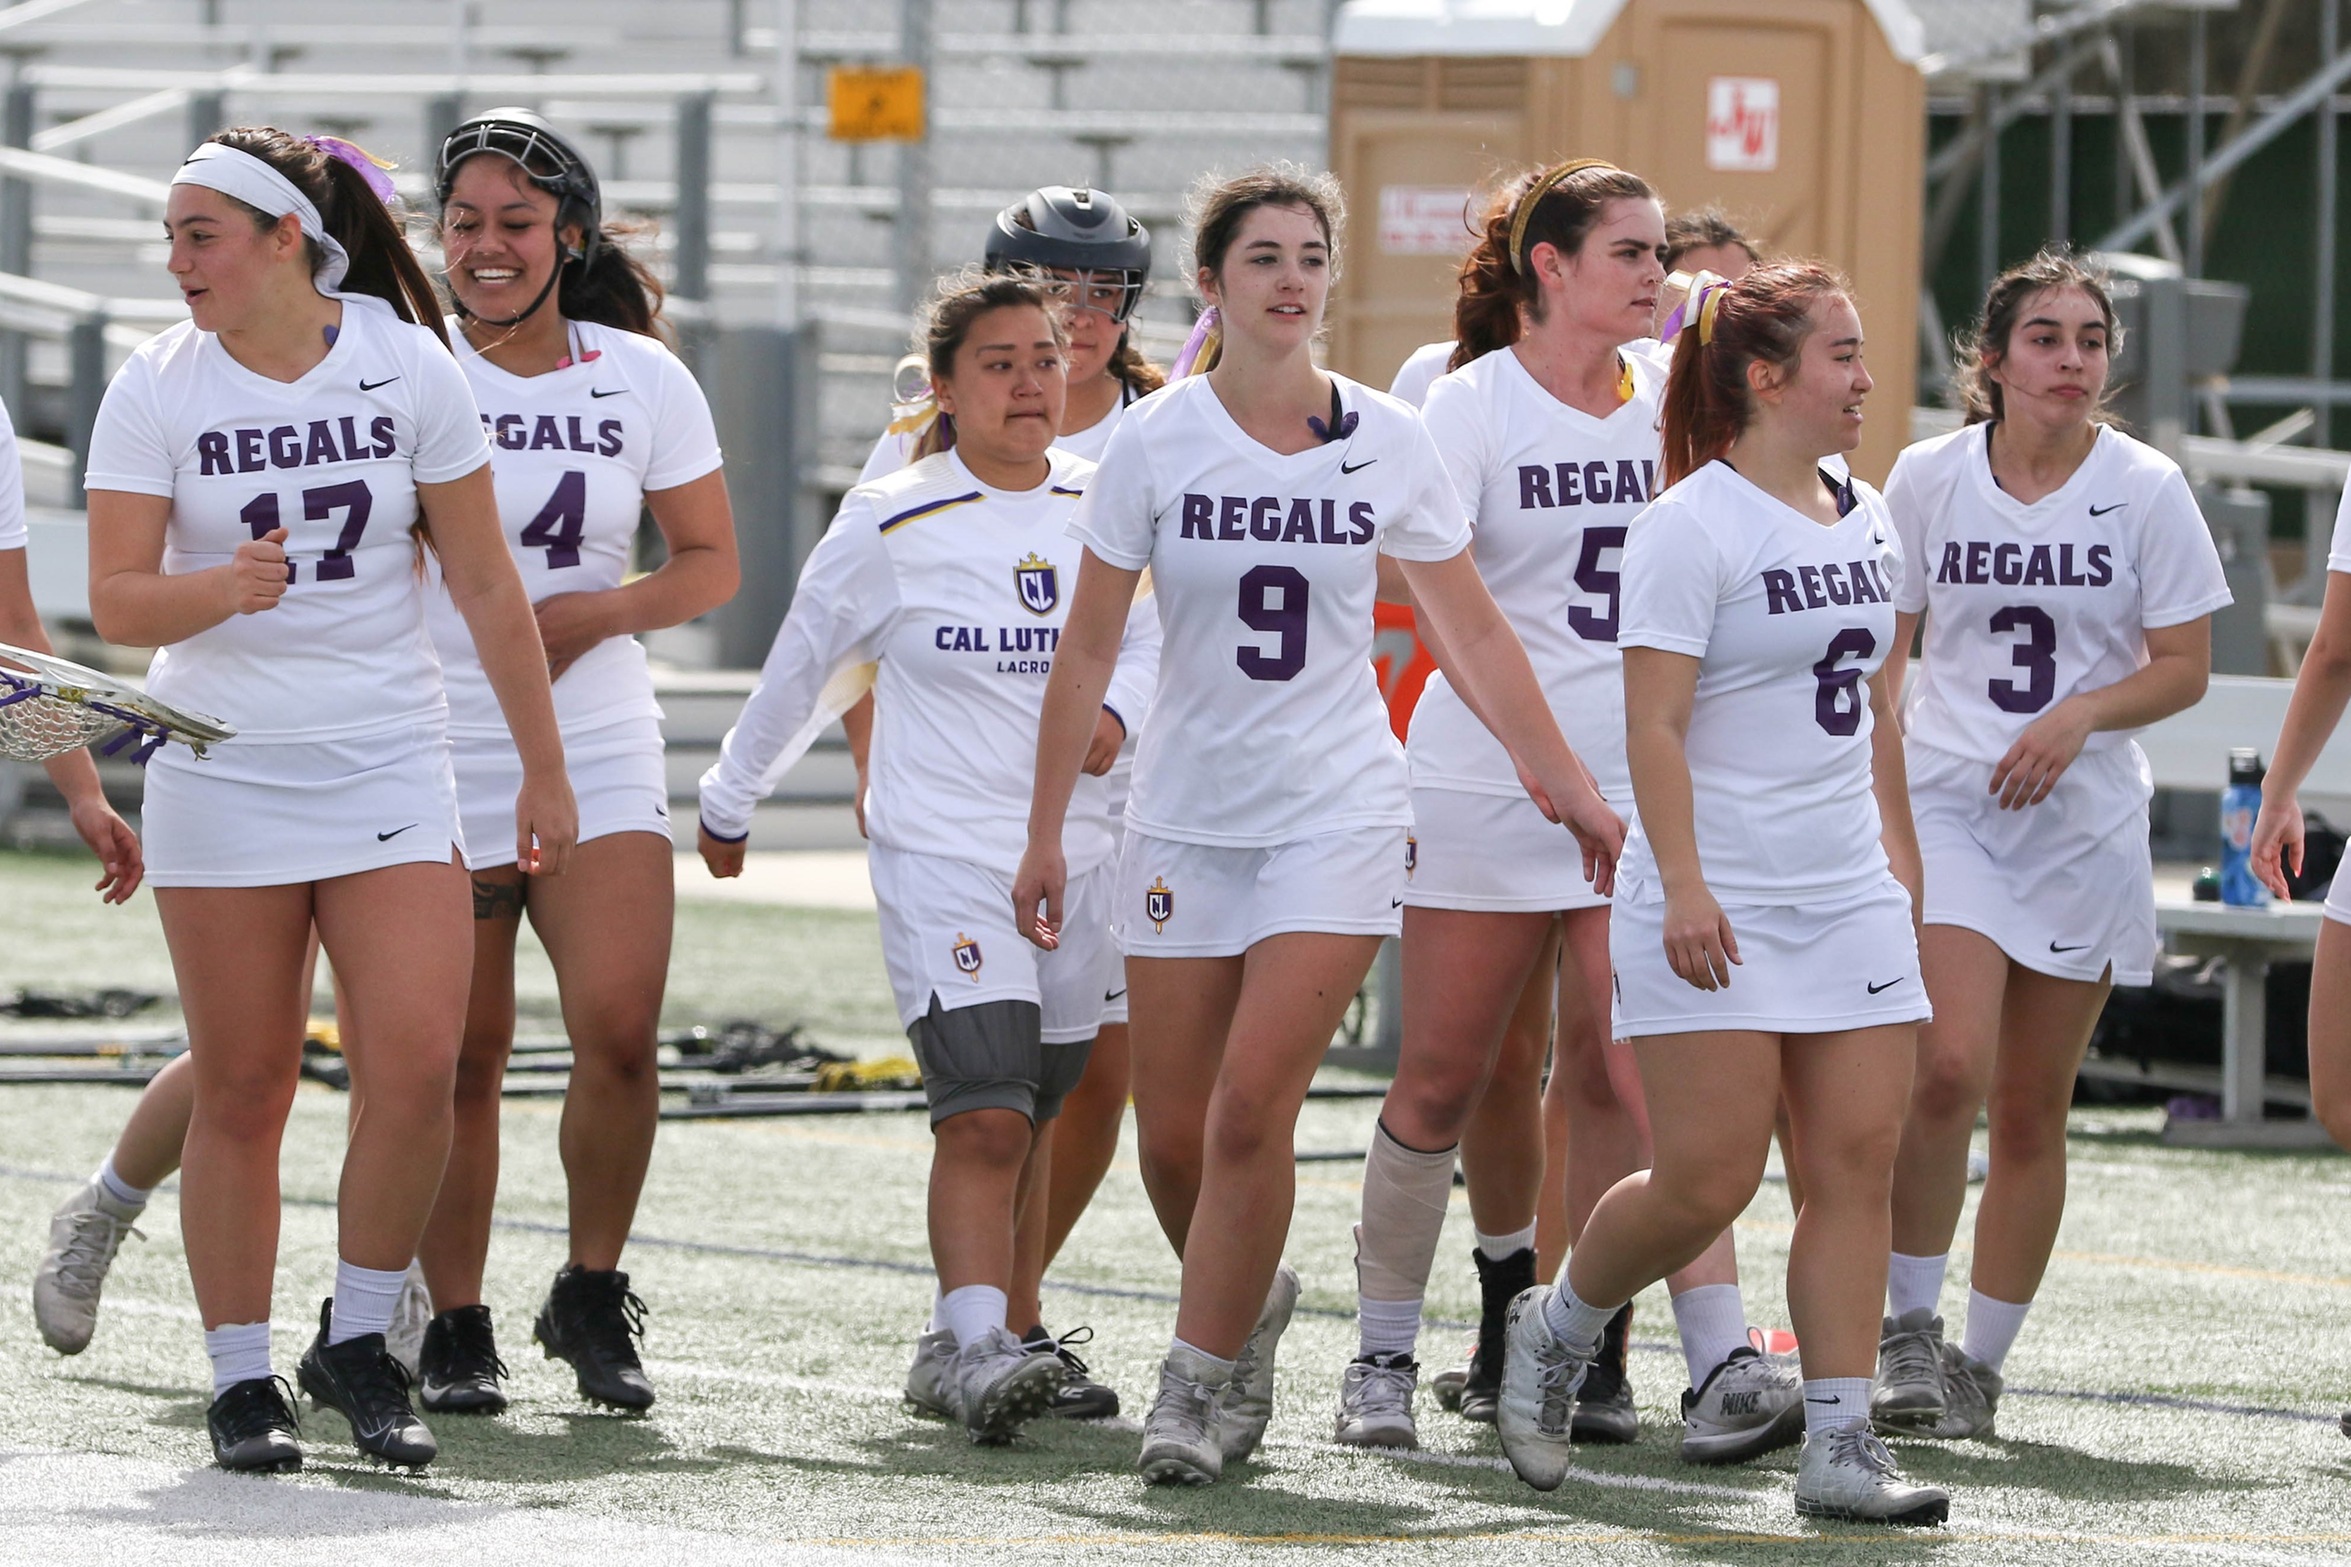 Early Lead Not Enough as Regals Fall to Undefeated Southwestern